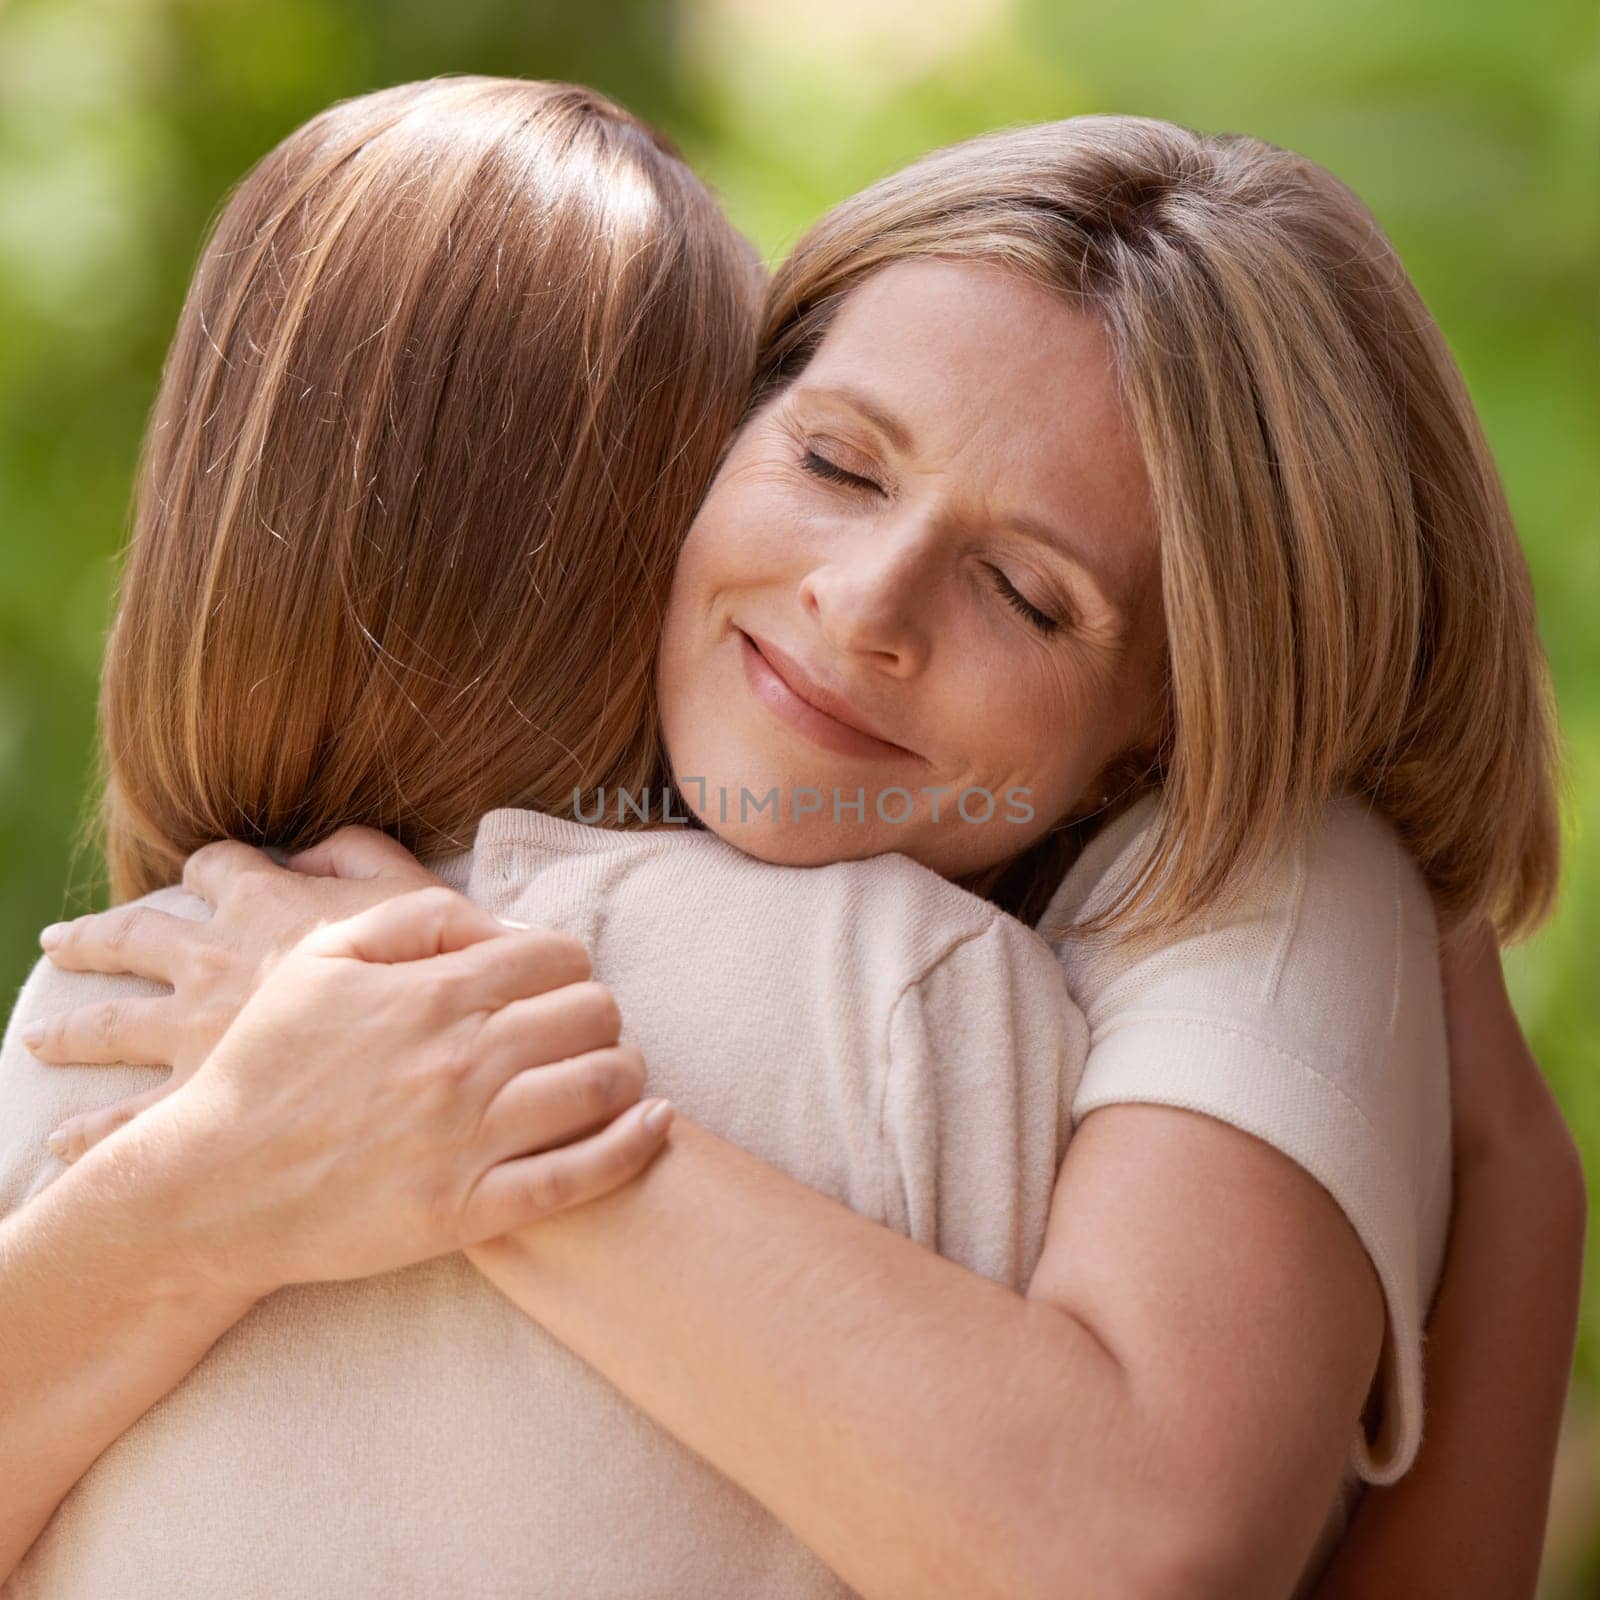 Parent, daughter and hug with support outdoors in nature for mothers day, care and affection for gratitude. Mom, girl child and bonding together on summer vacation for love, smile and closeup.